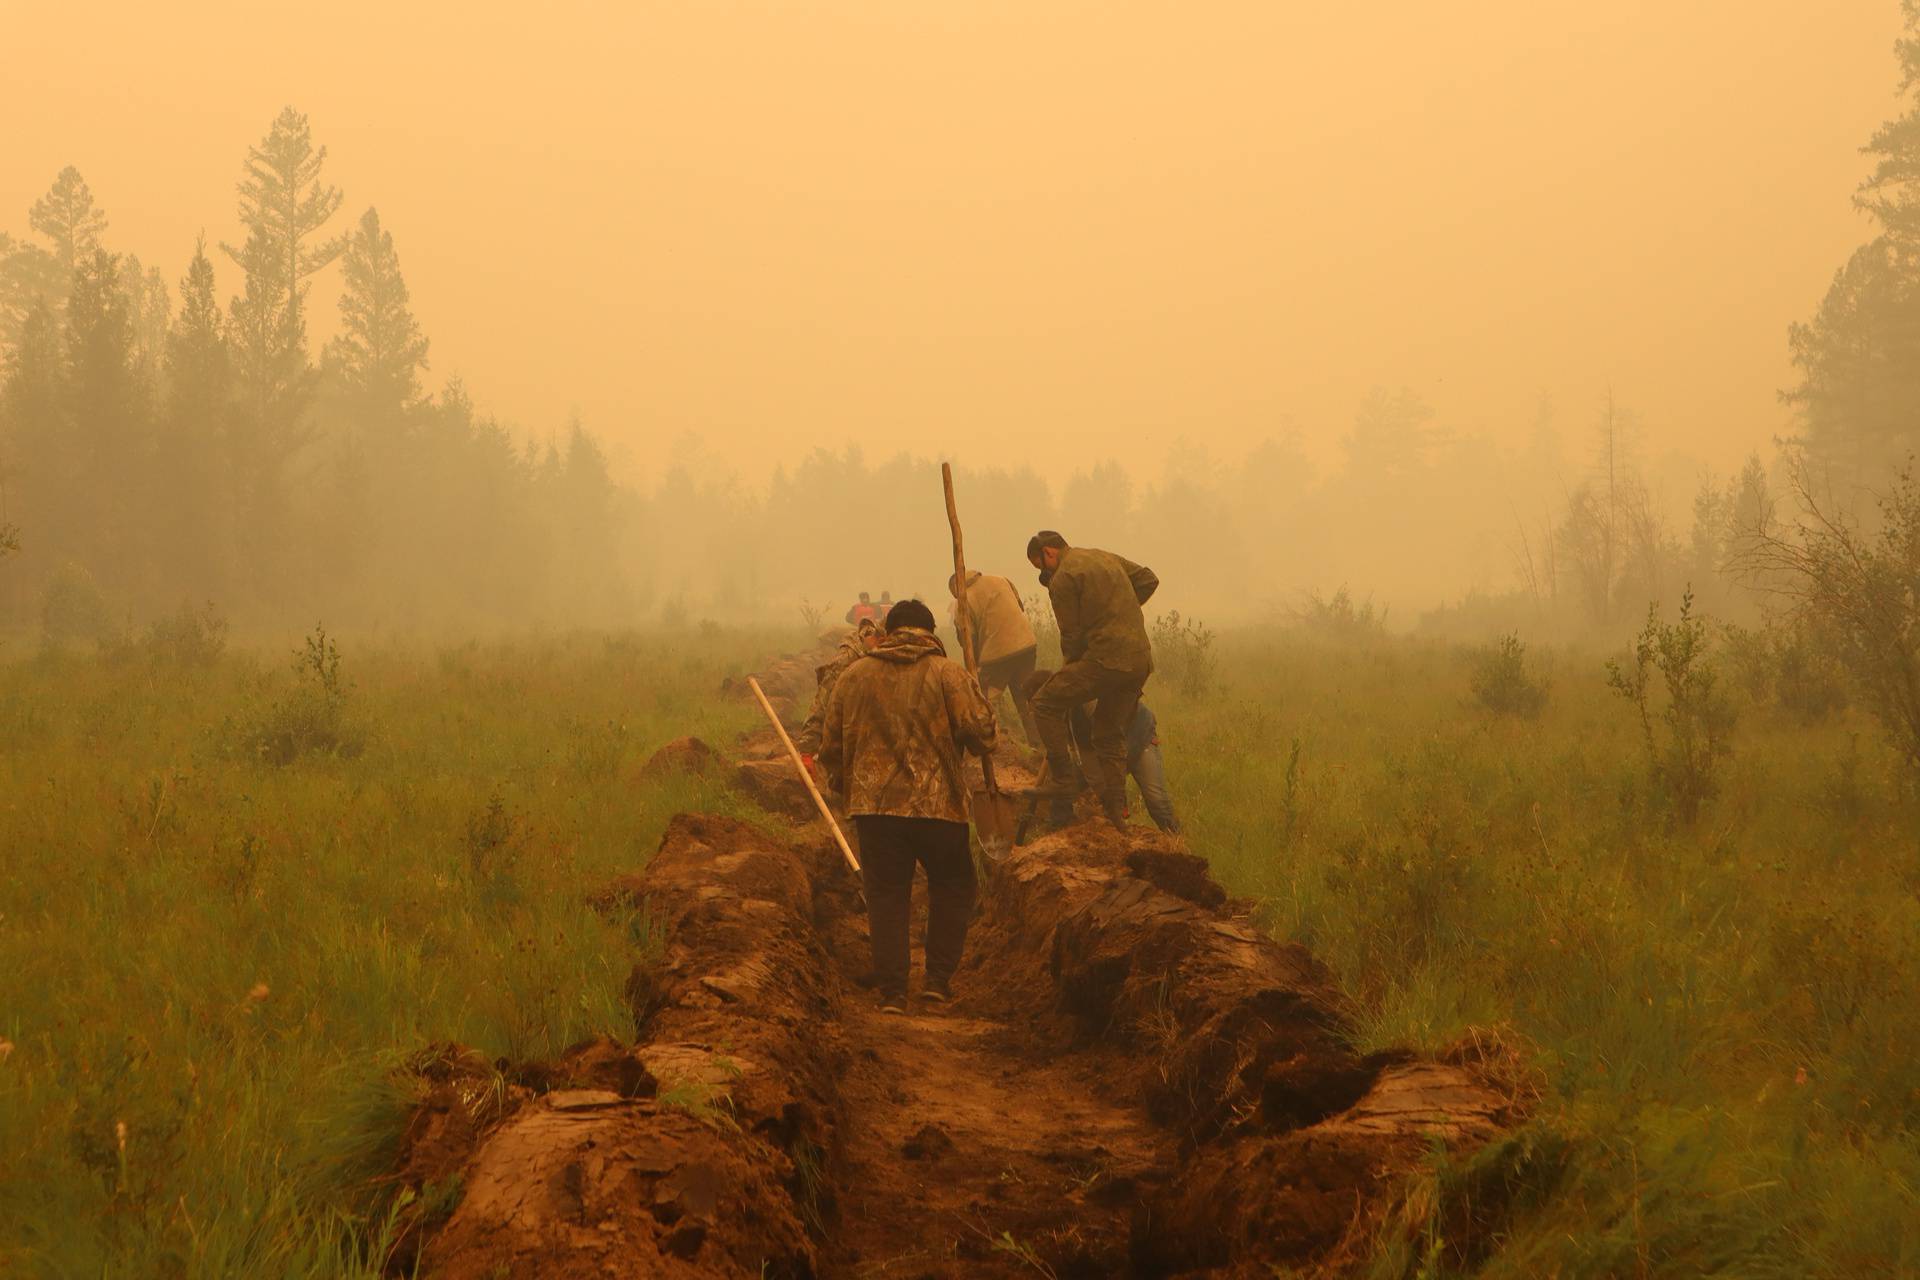 Firefighters and volunteers dig a control line during the work on extinguishing a forest fire in Yakutia